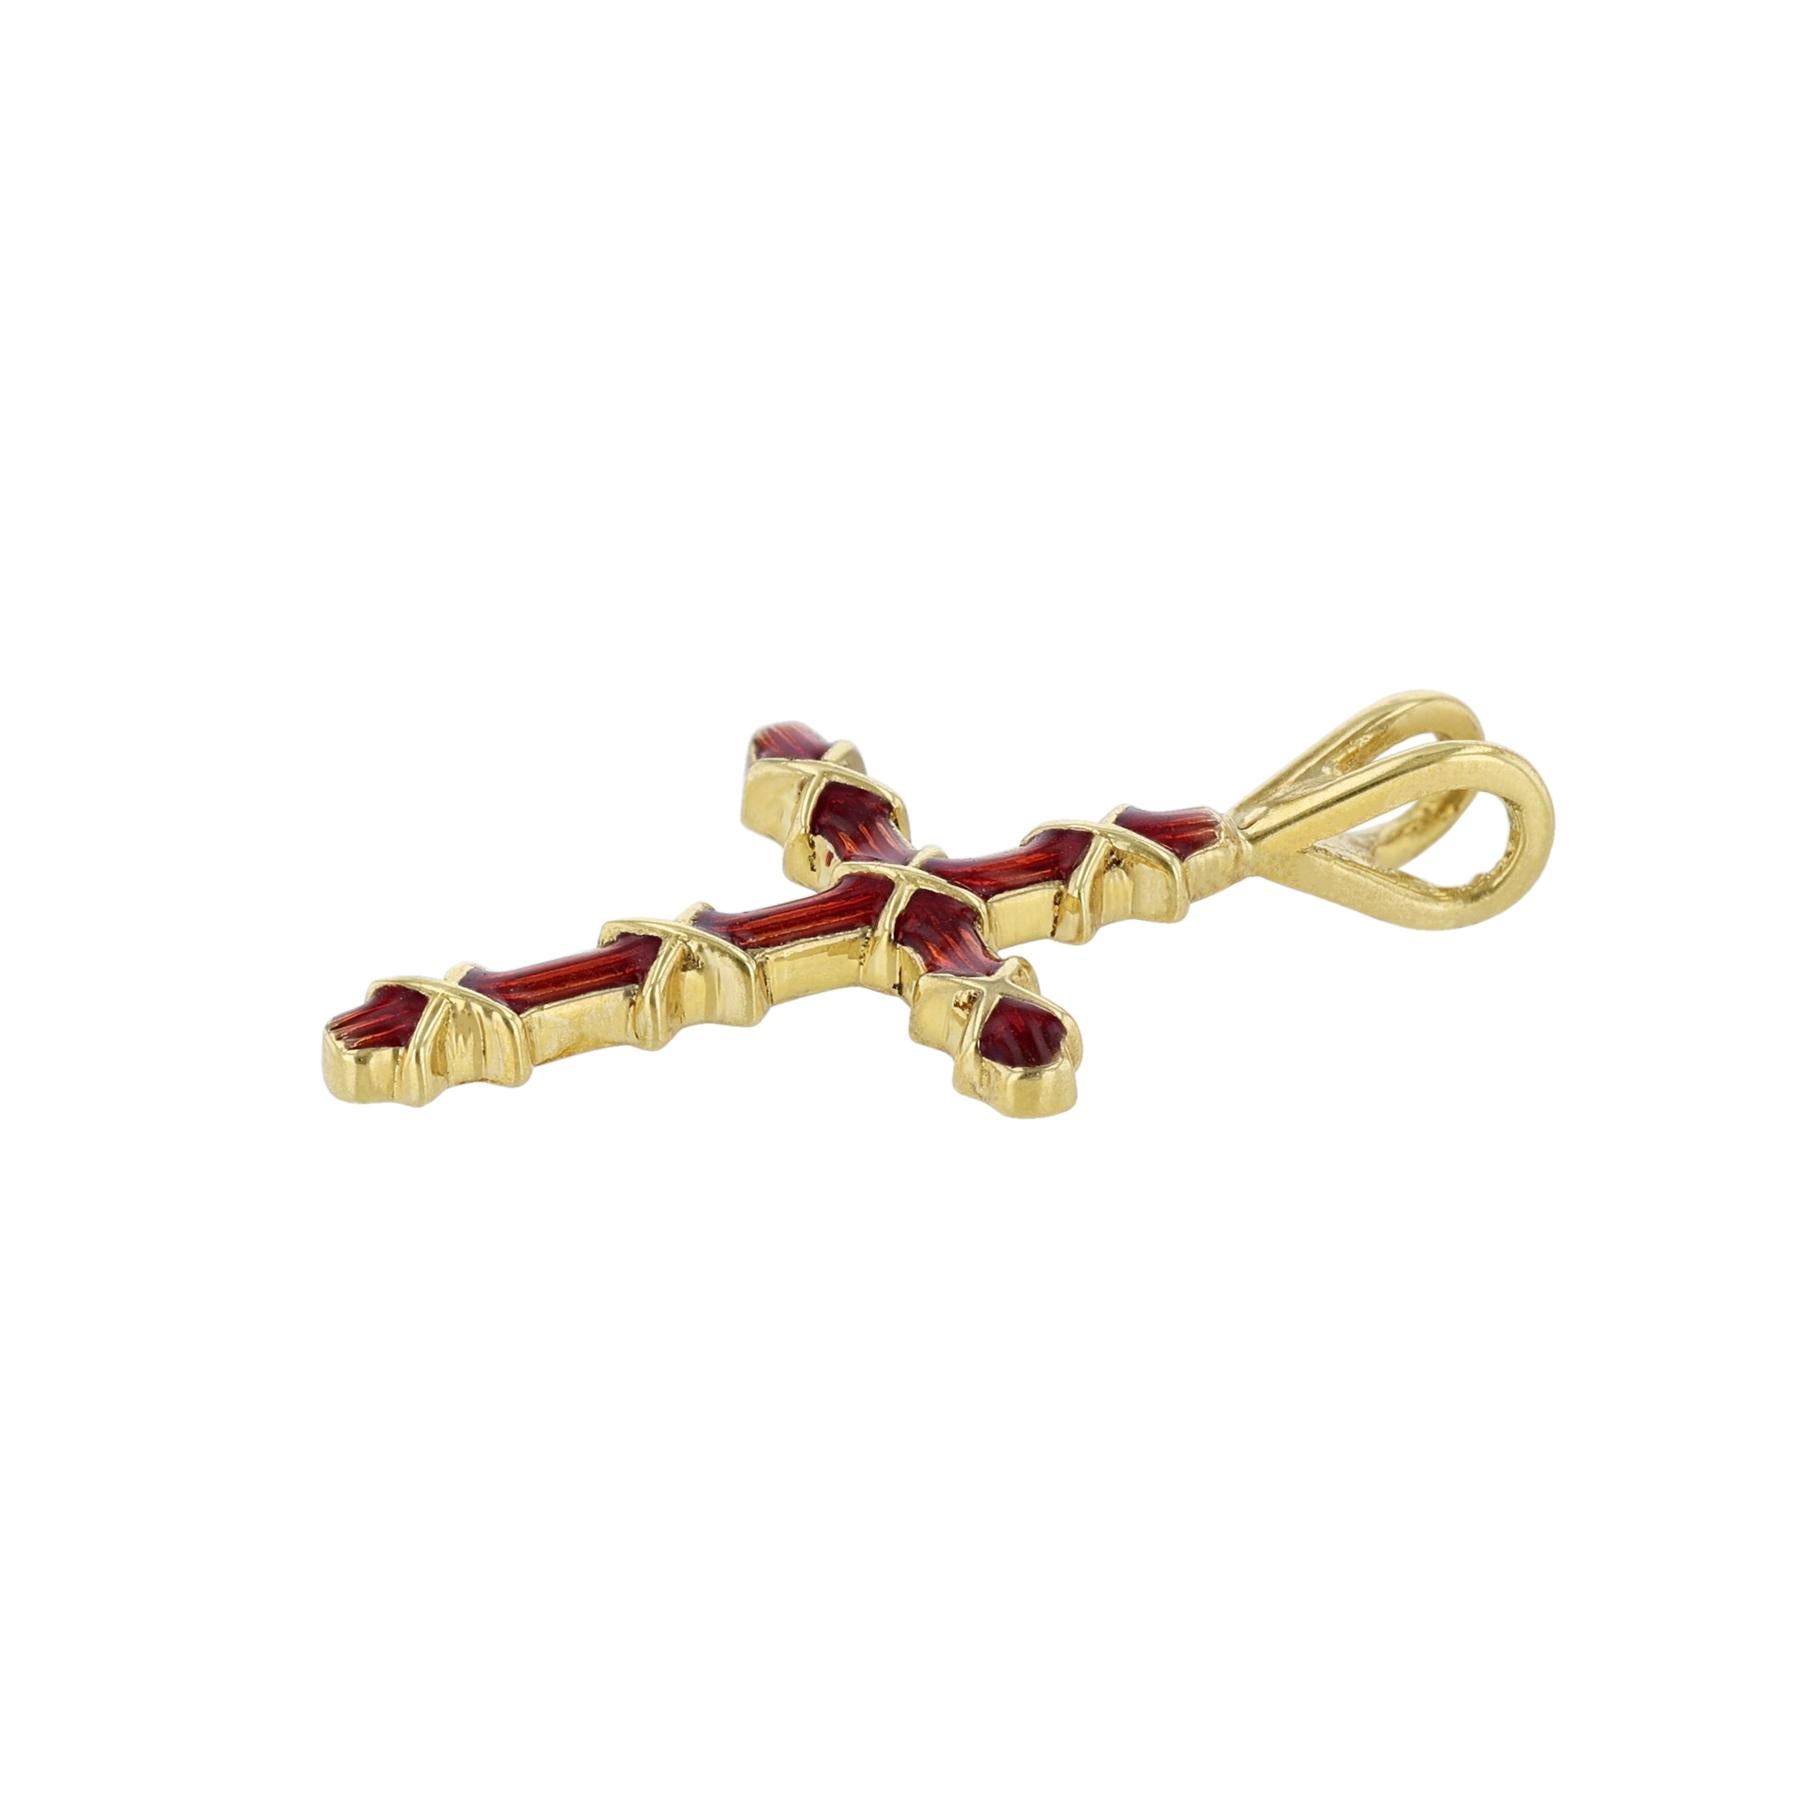 This cross pendant is made in 18K yellow gold and red enamel. 